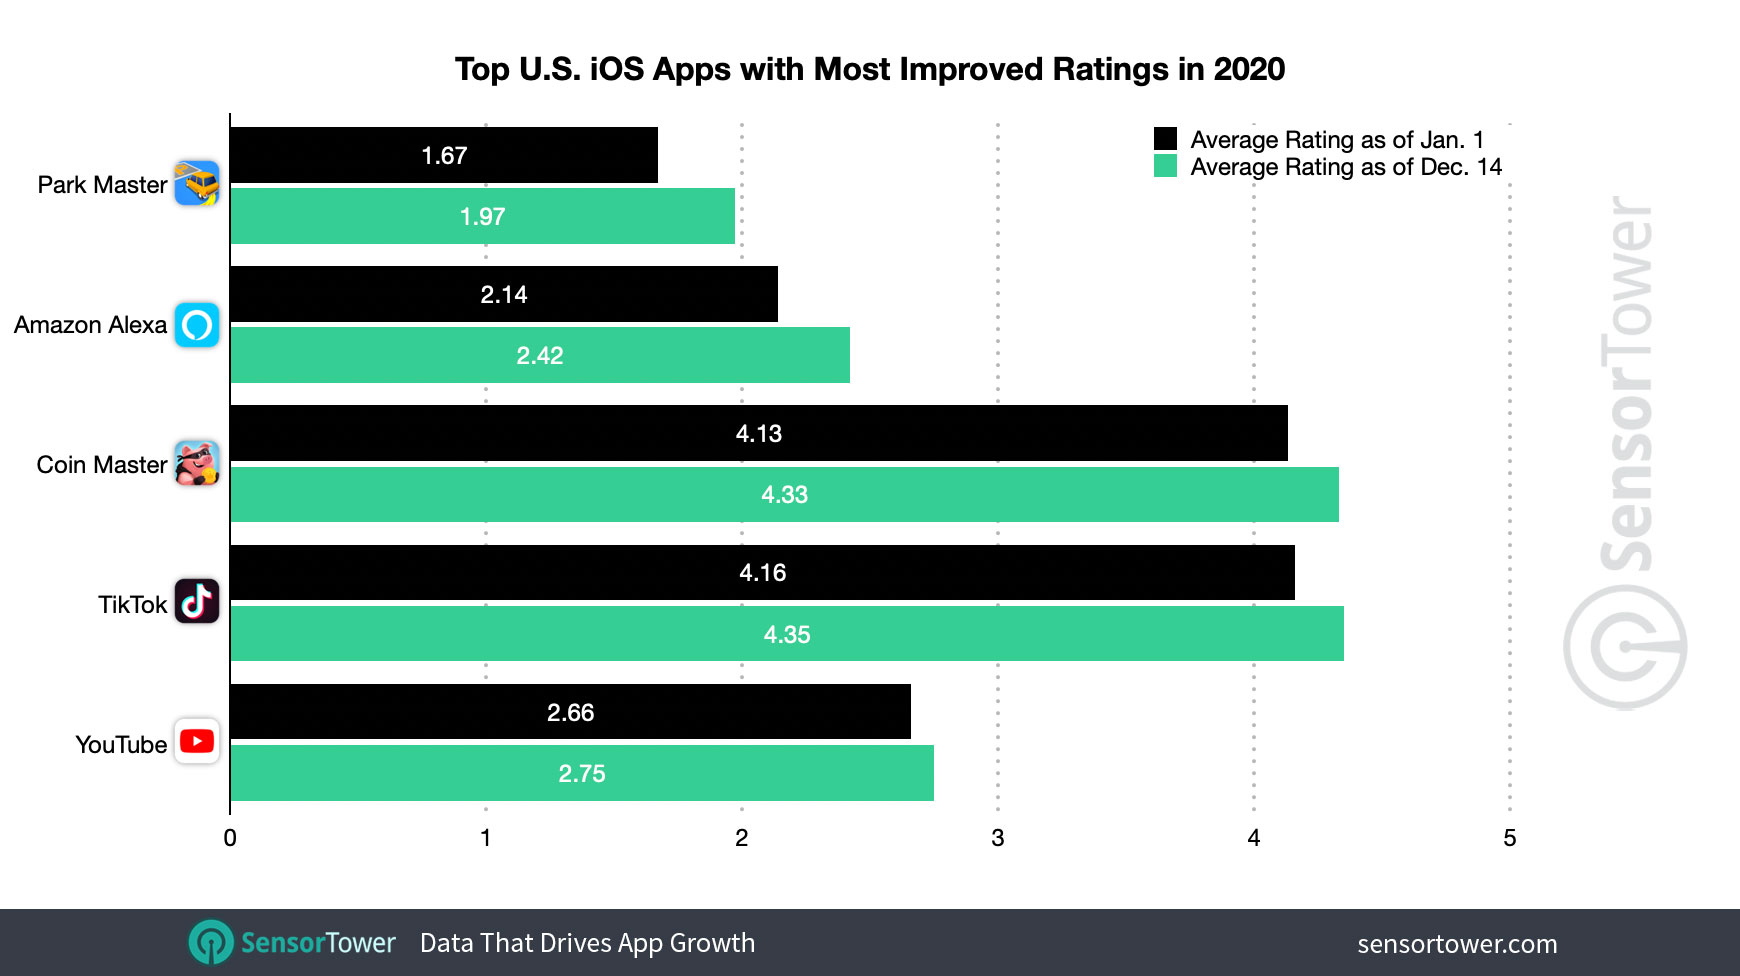 Entertainment apps saw the most improvement in their ratings in 2020.